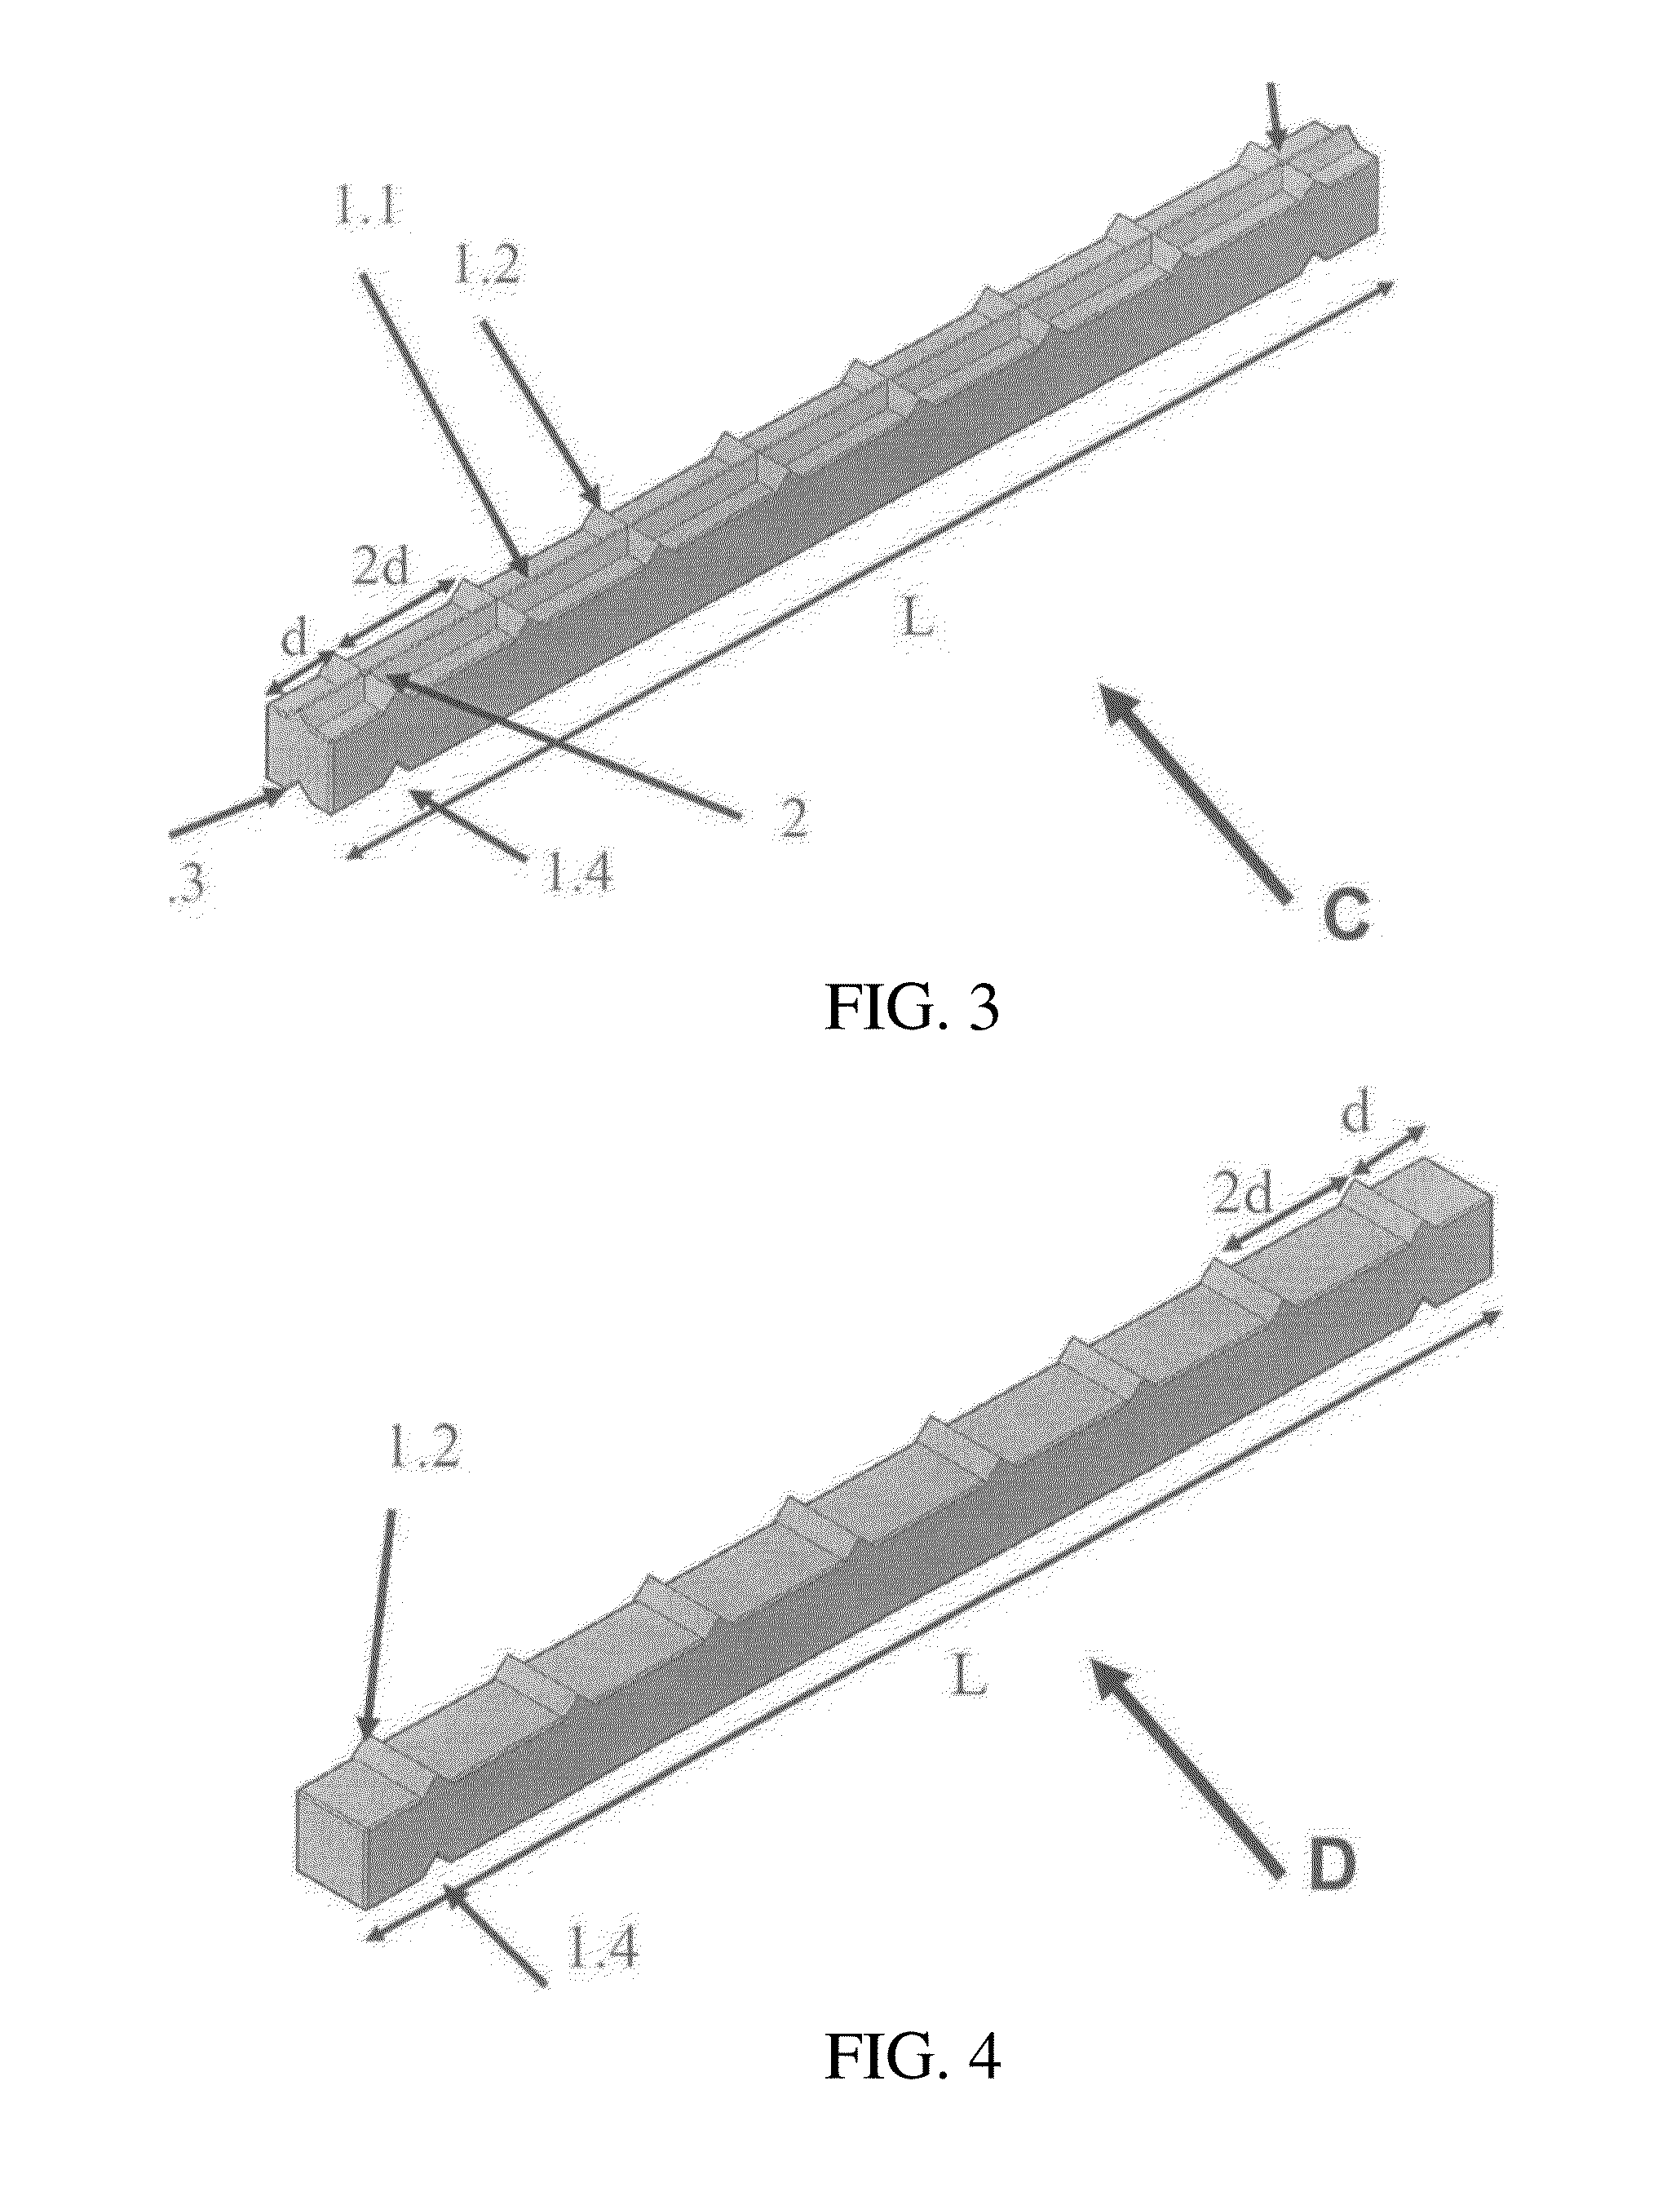 Shielding composite building materials with a low internal level of ionising radiation